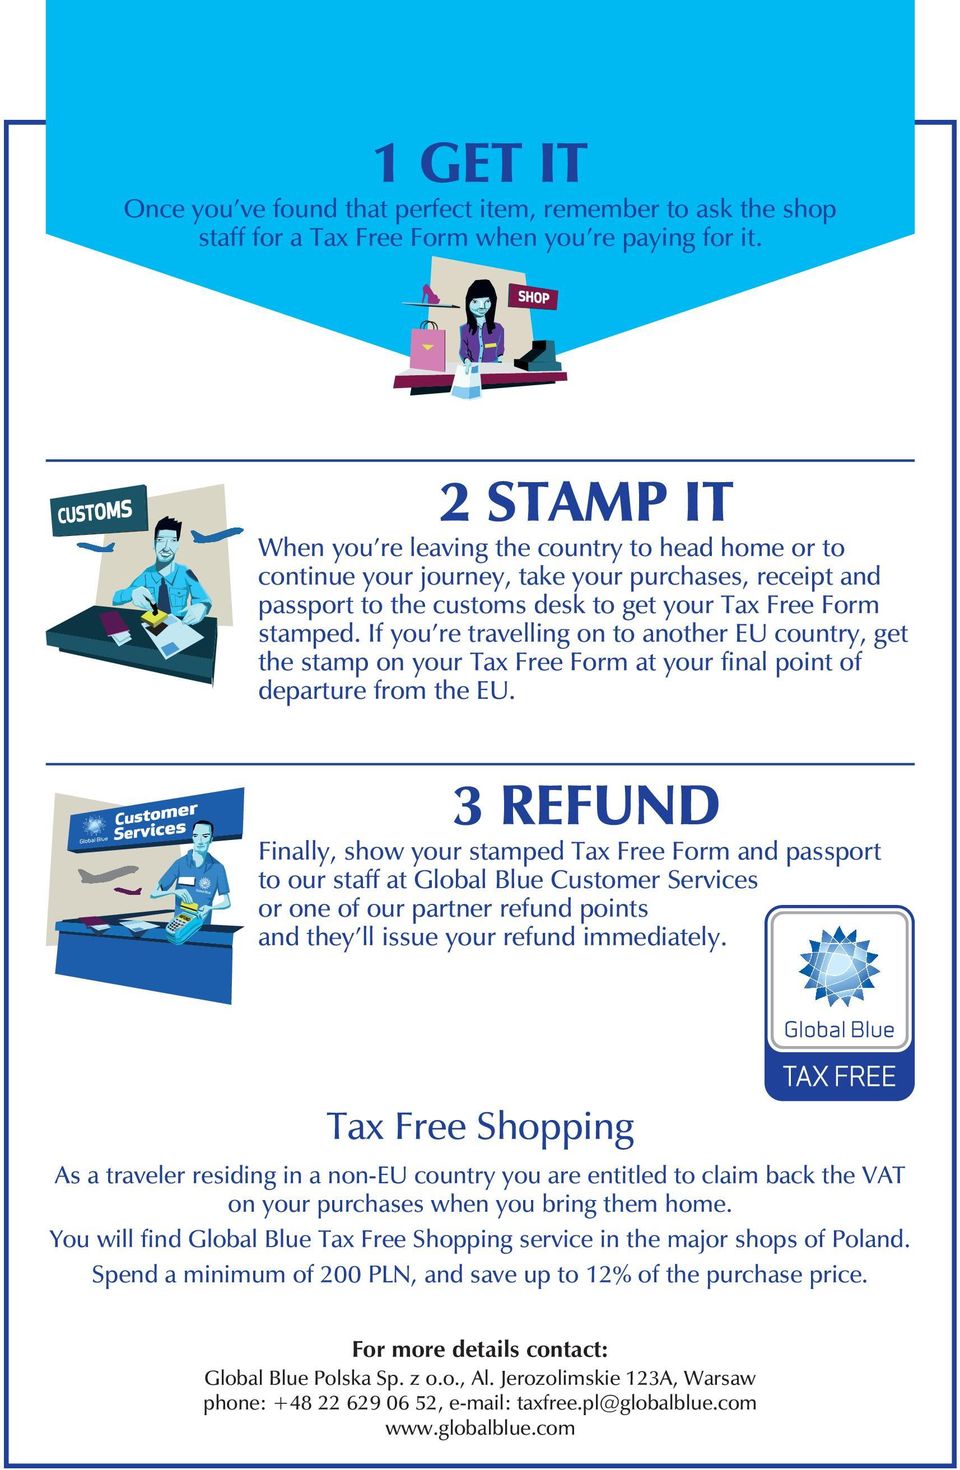 If you re travelling on to another EU country, get the stamp on your Tax Free Form at your final point of departure from the EU.